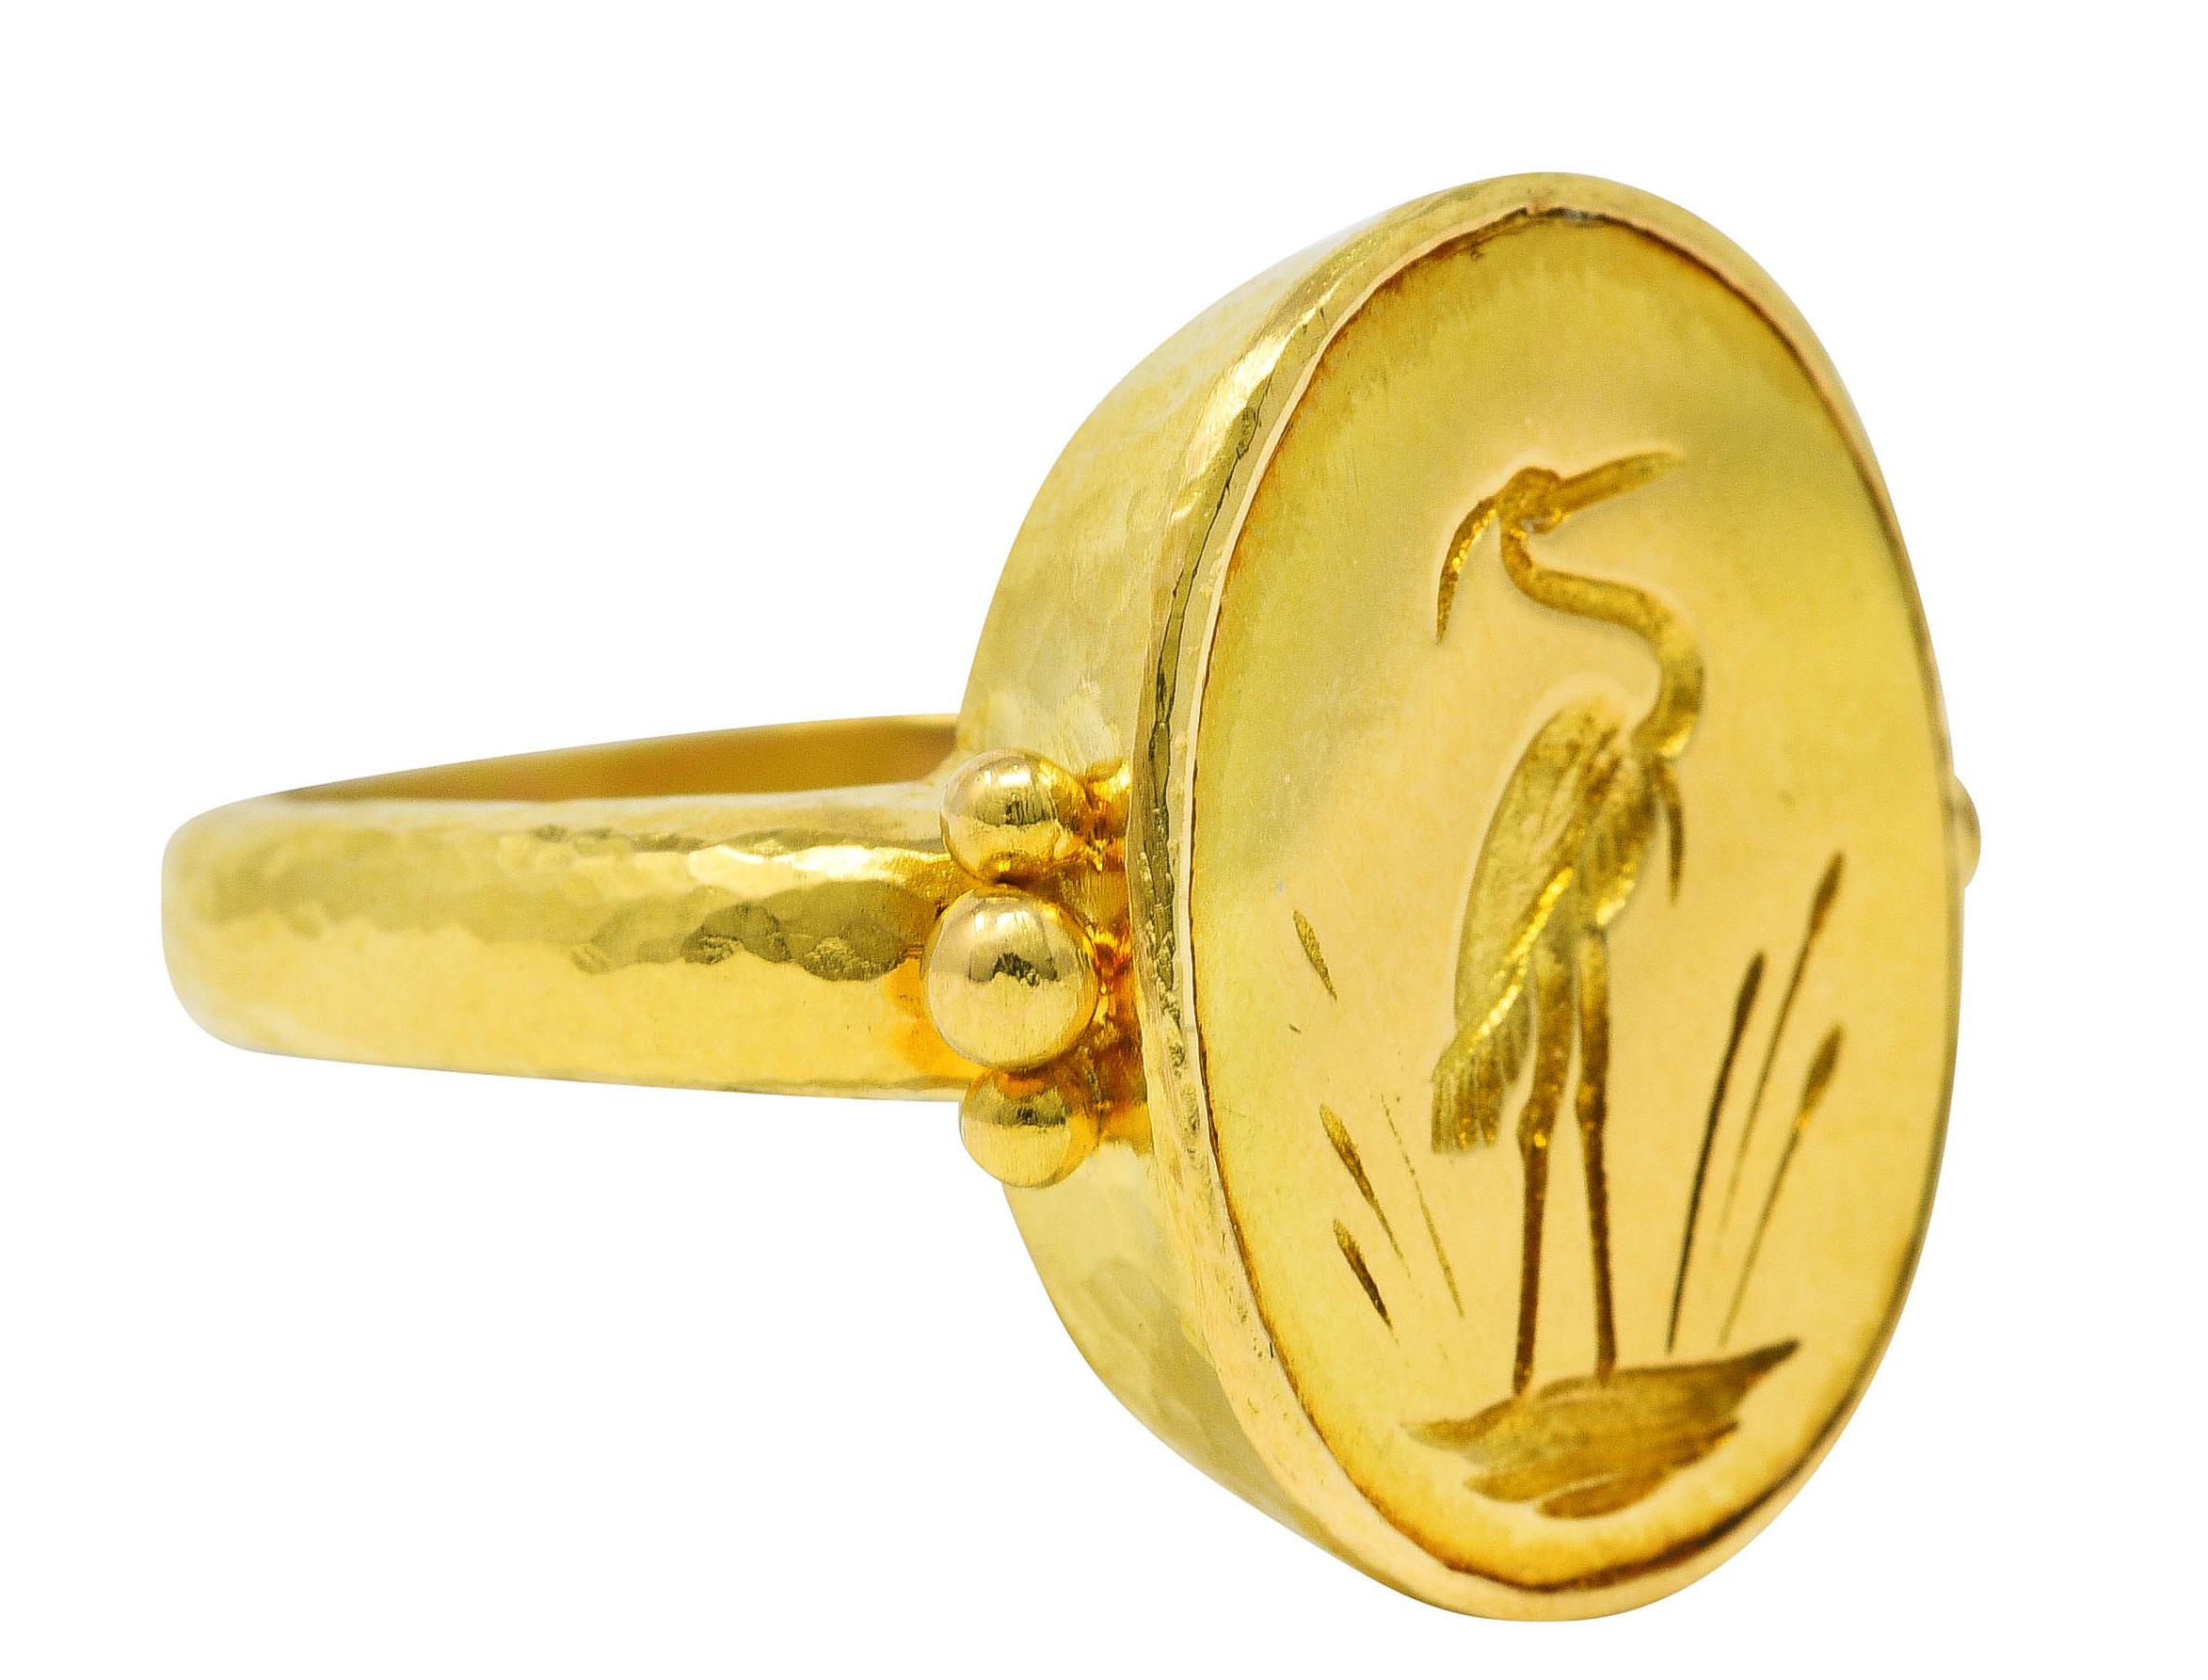 Ring centers an engraved gold oval intaglio depicting a crane wading through fronds. Flanked by beaded gold shoulders. With hammered gold texture throughout. Stamped 19k for 19 karat gold. With maker's mark for Elizabeth Locke. Circa: 21st century.